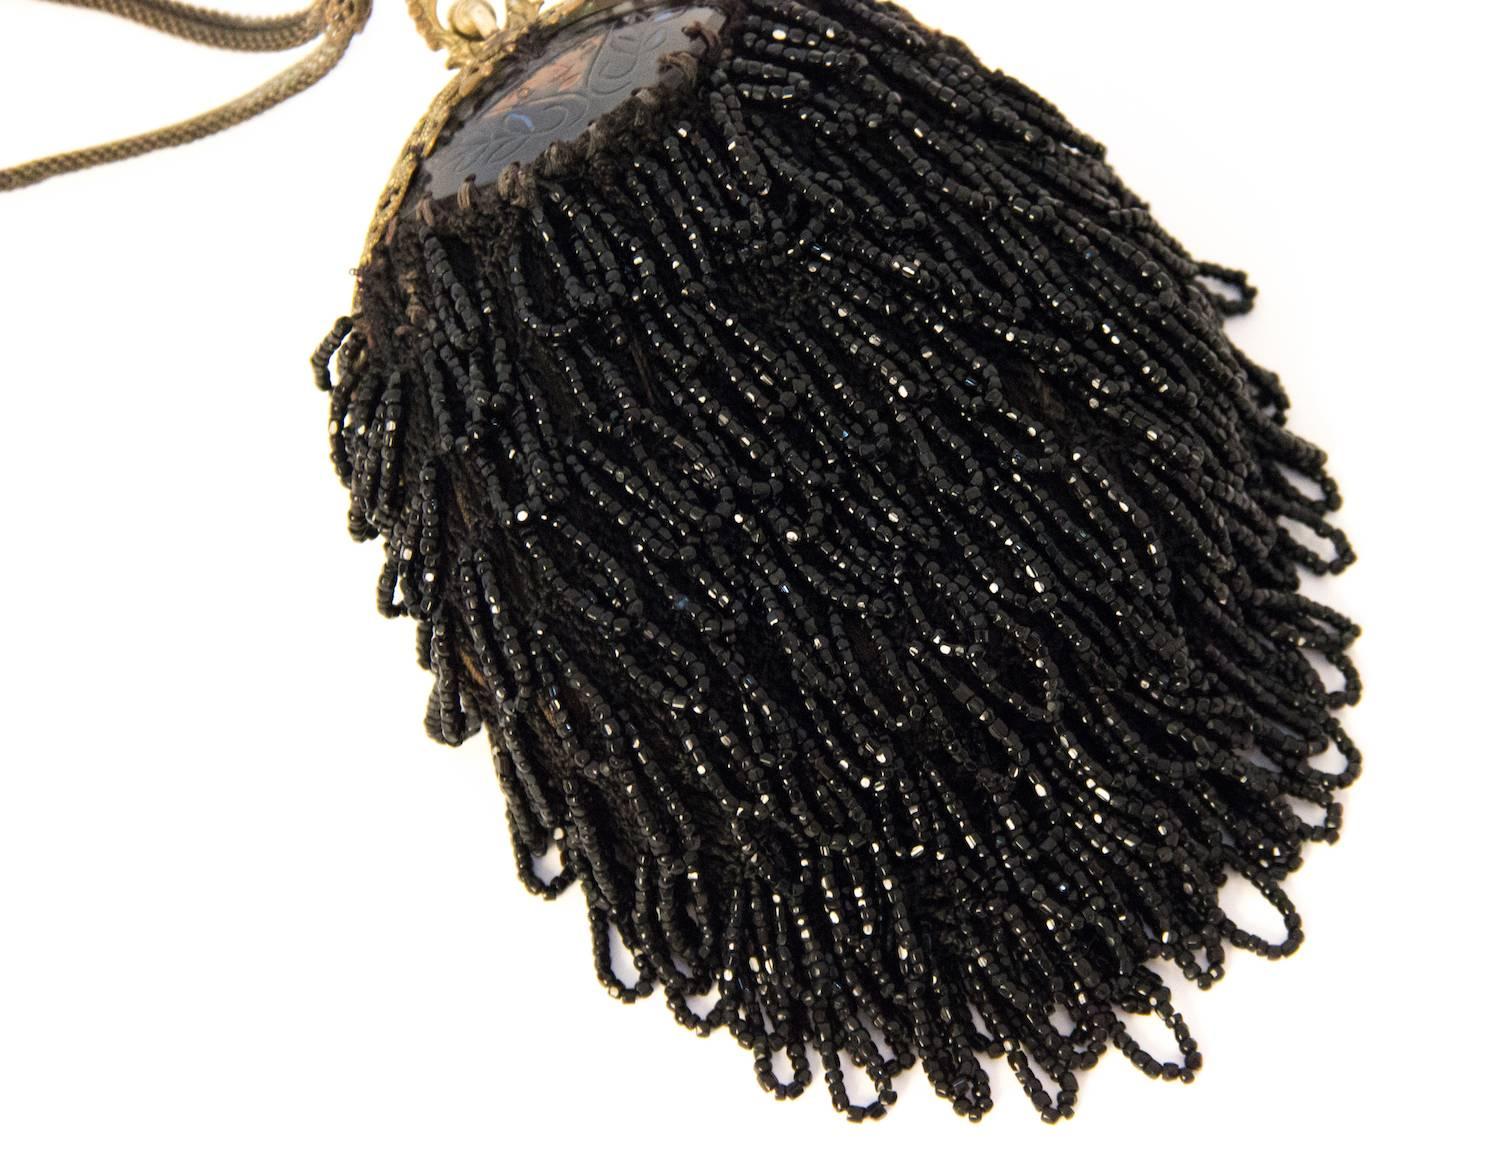 1890s victorian black beaded pouch with unusual hand carved frame embellishment. Filigree metal frame. Metal mesh strap. Lined in dark olive green cotton. 

Measurements:

Body of pouch: approx. 6 x 4 1/2 inches

Strap: 14 inches around ( 7